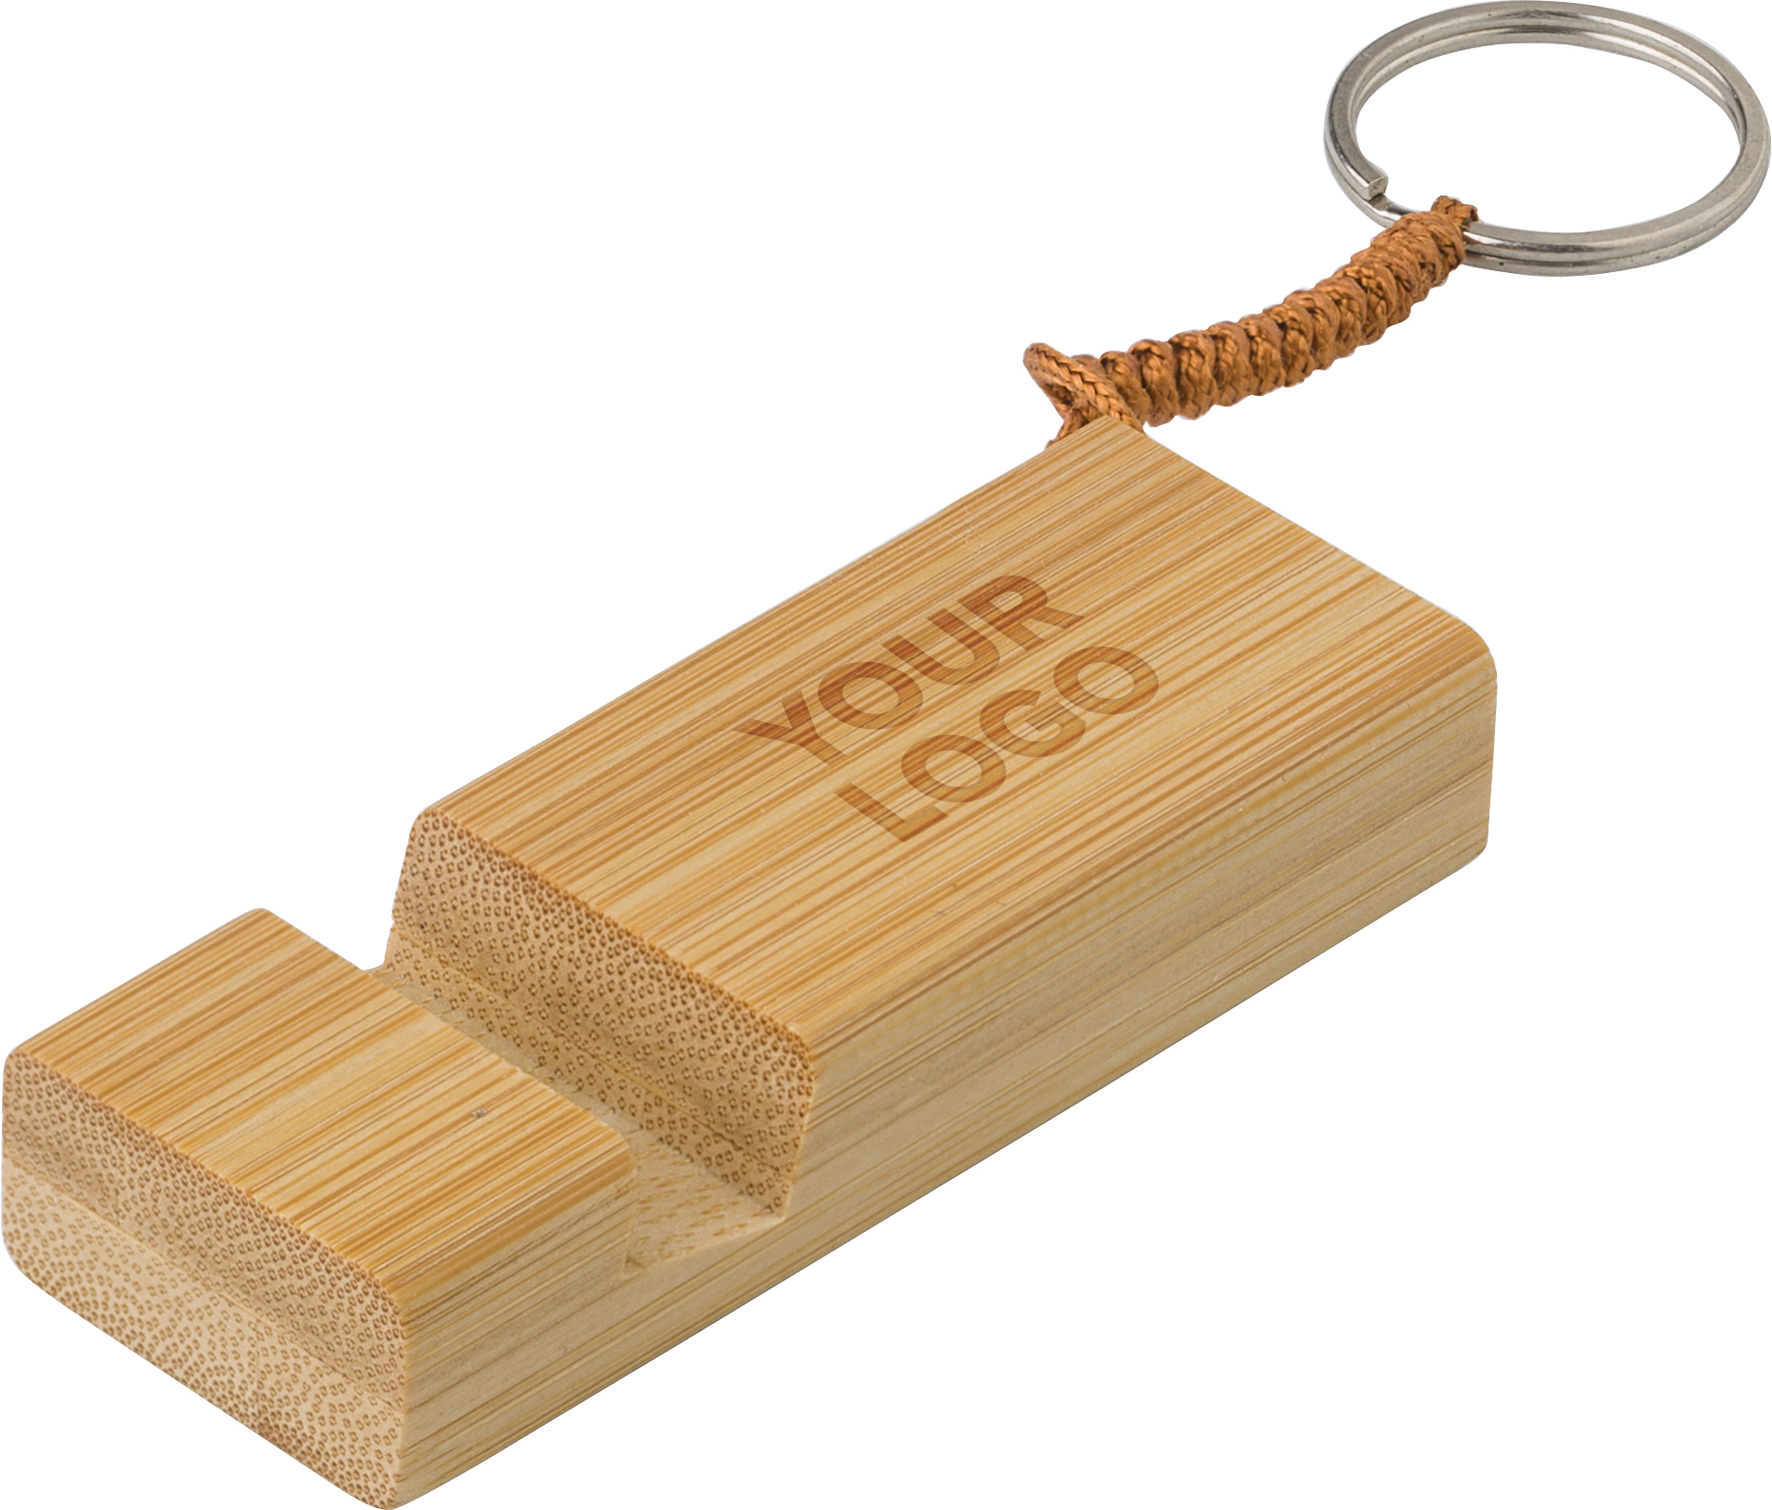 000000748770 823999999 3d045 rgt pro02 2022 log - Bamboo key chain phone stand